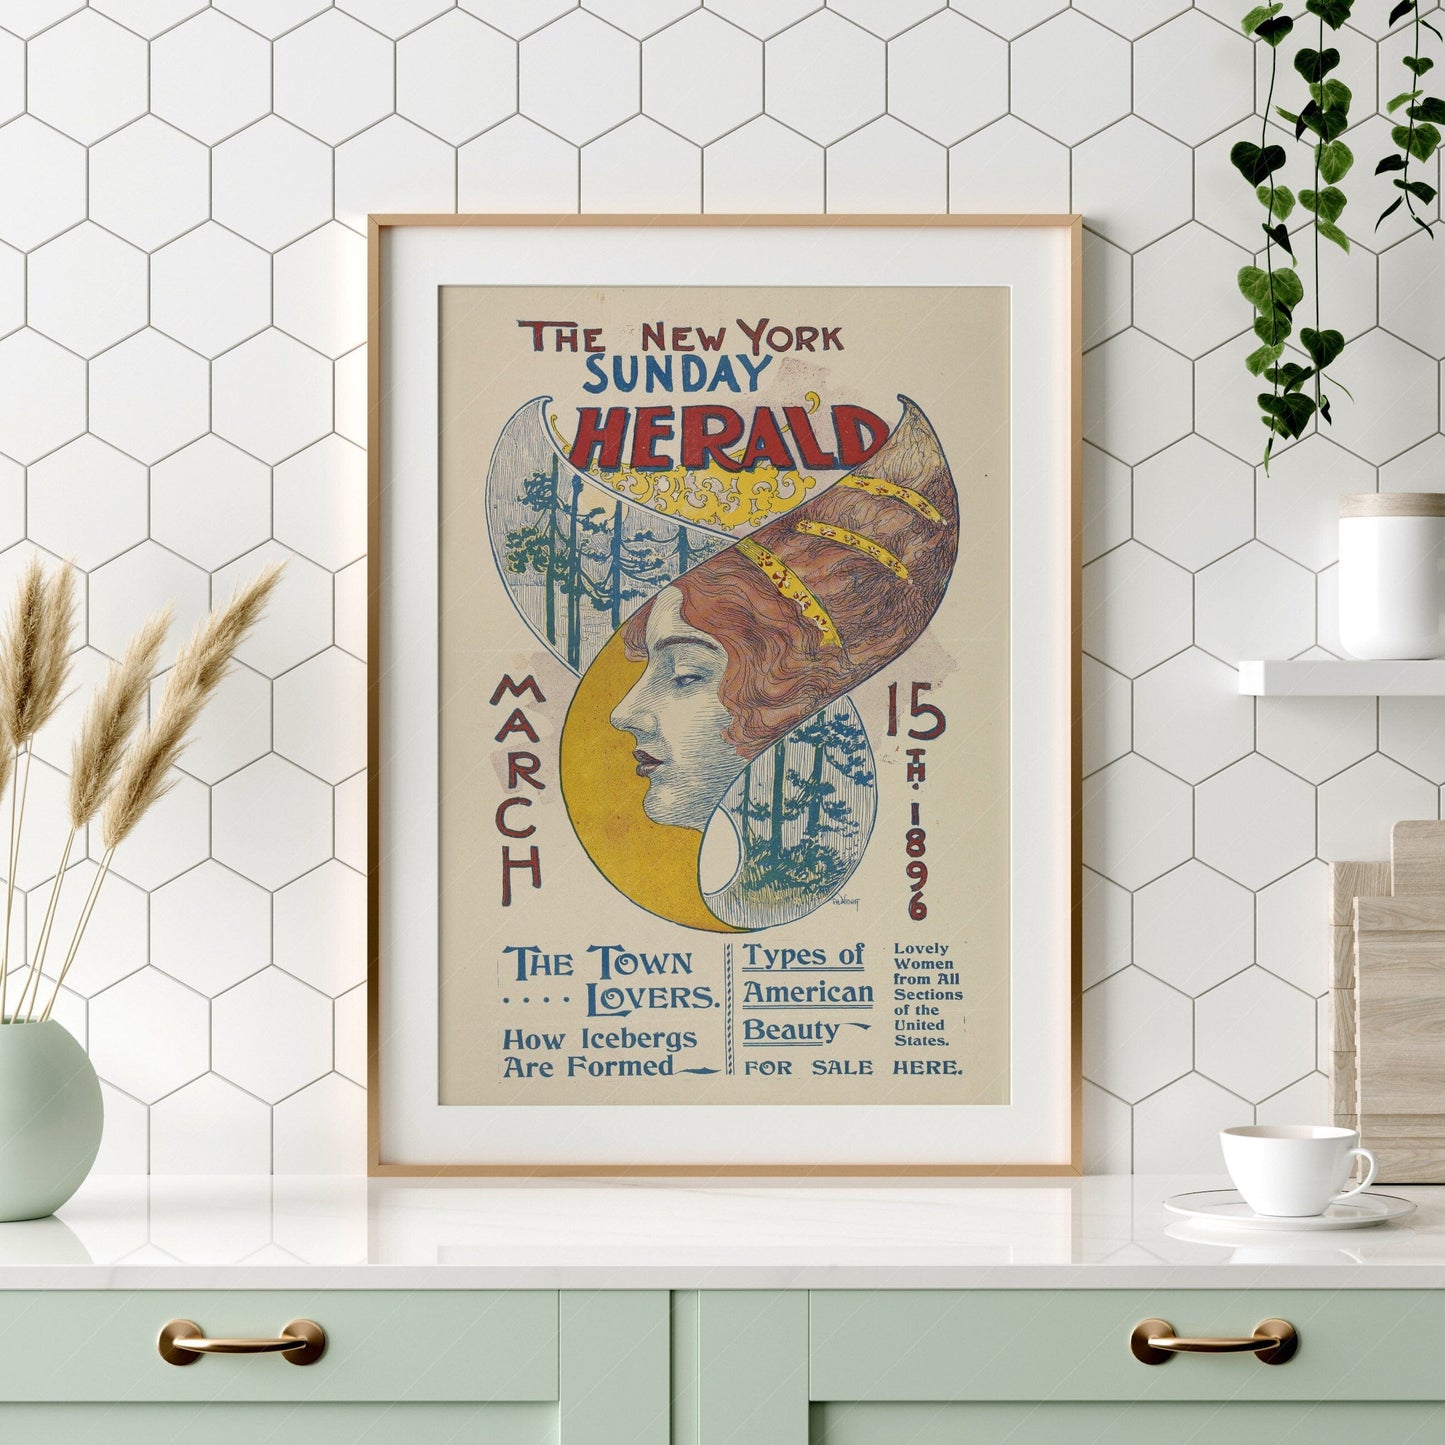 Home Poster Decor NYC Sunday Herald poster, Vintage posters, New York City Vintage, Fashion Poster, Newspaper poster, Antique posters, Women Retro Magazine 2